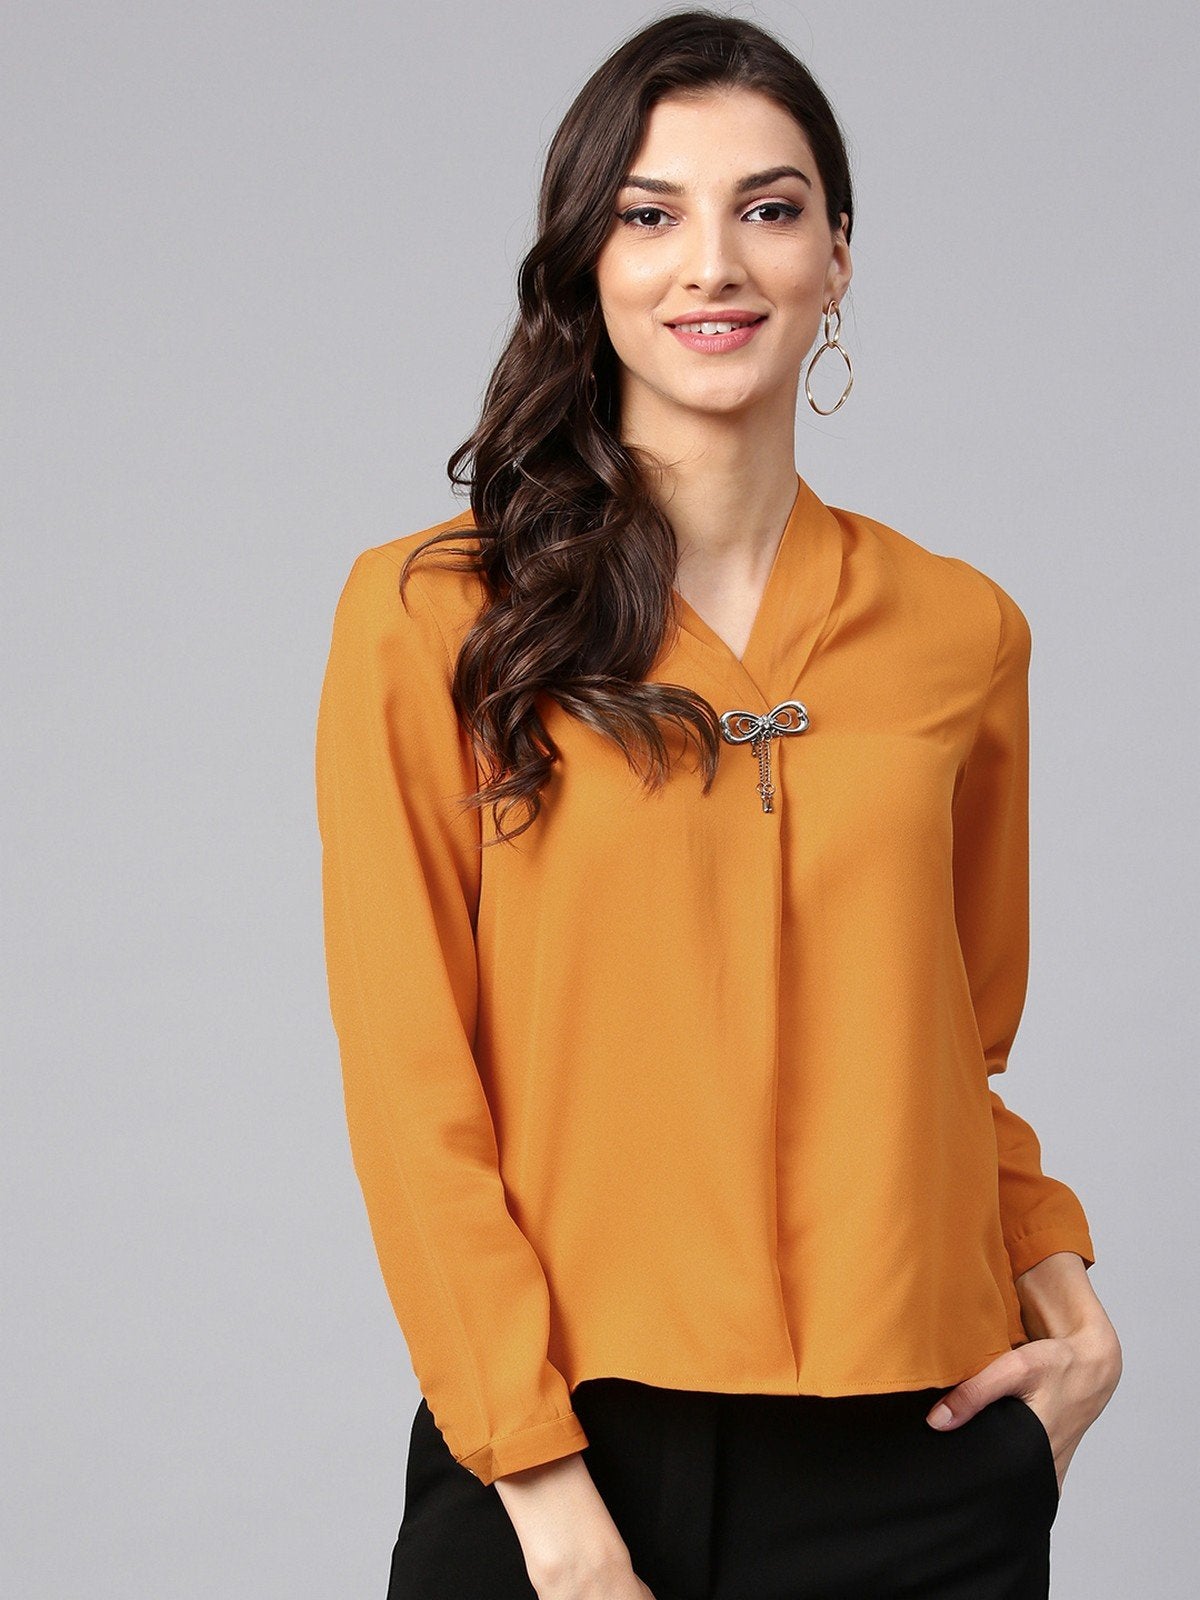 Women's Solid Top With Front Brotch - Pannkh